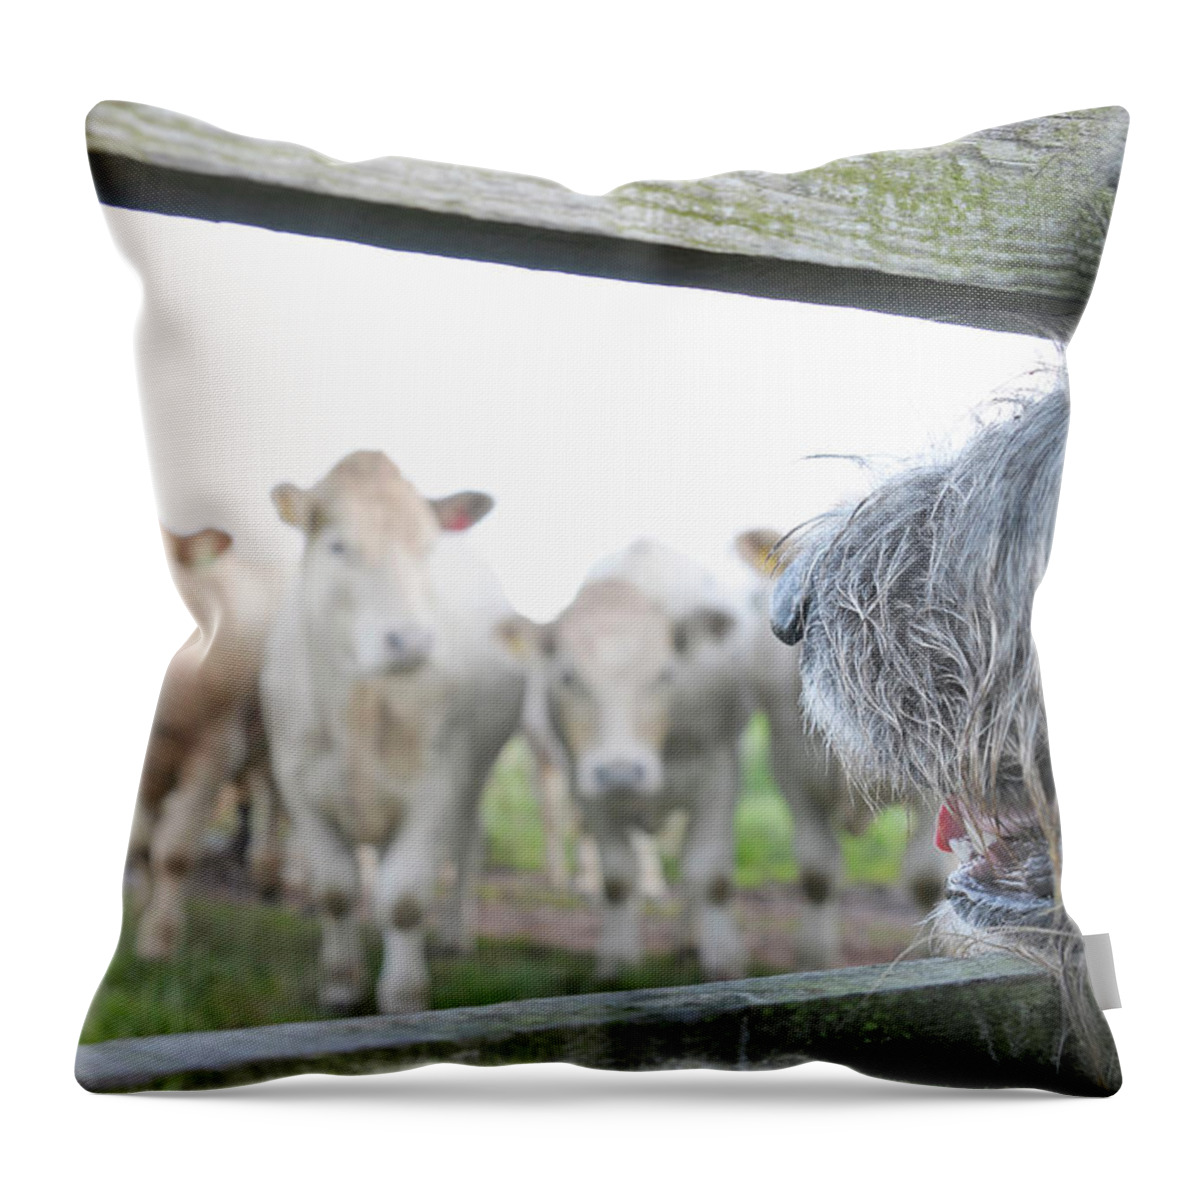 Alertness Throw Pillow featuring the photograph Dog Watching Cows Through Fence by Cecilia Cartner